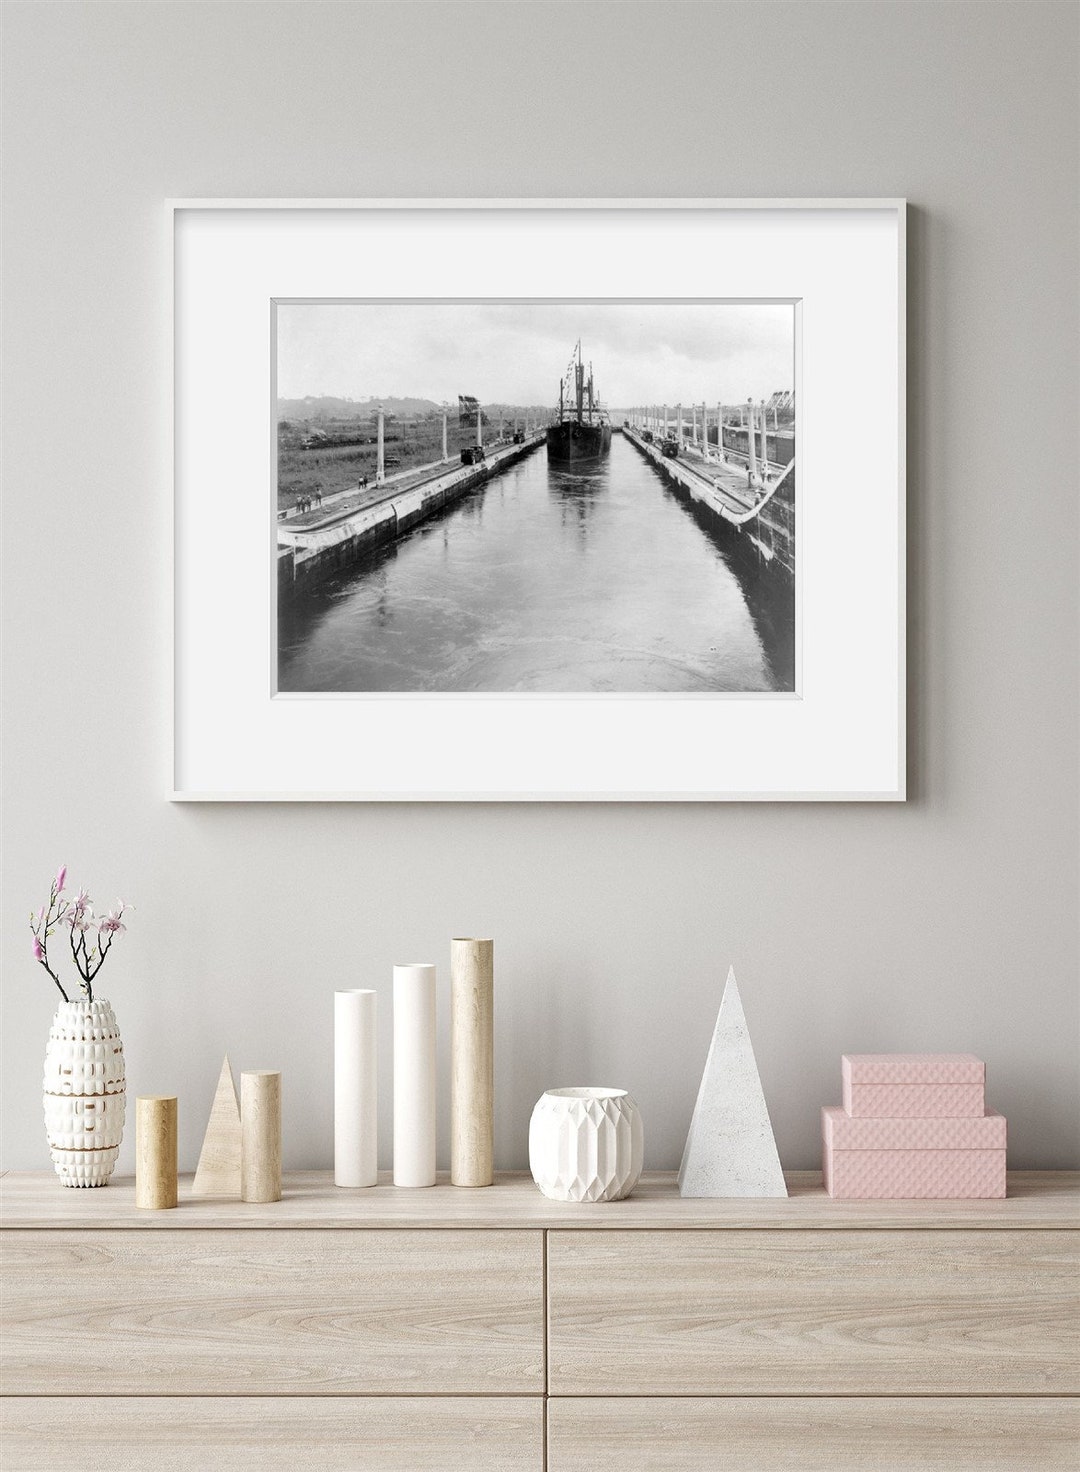 Photo: Opening of the Panama Canals.s. Anconwest - Etsy